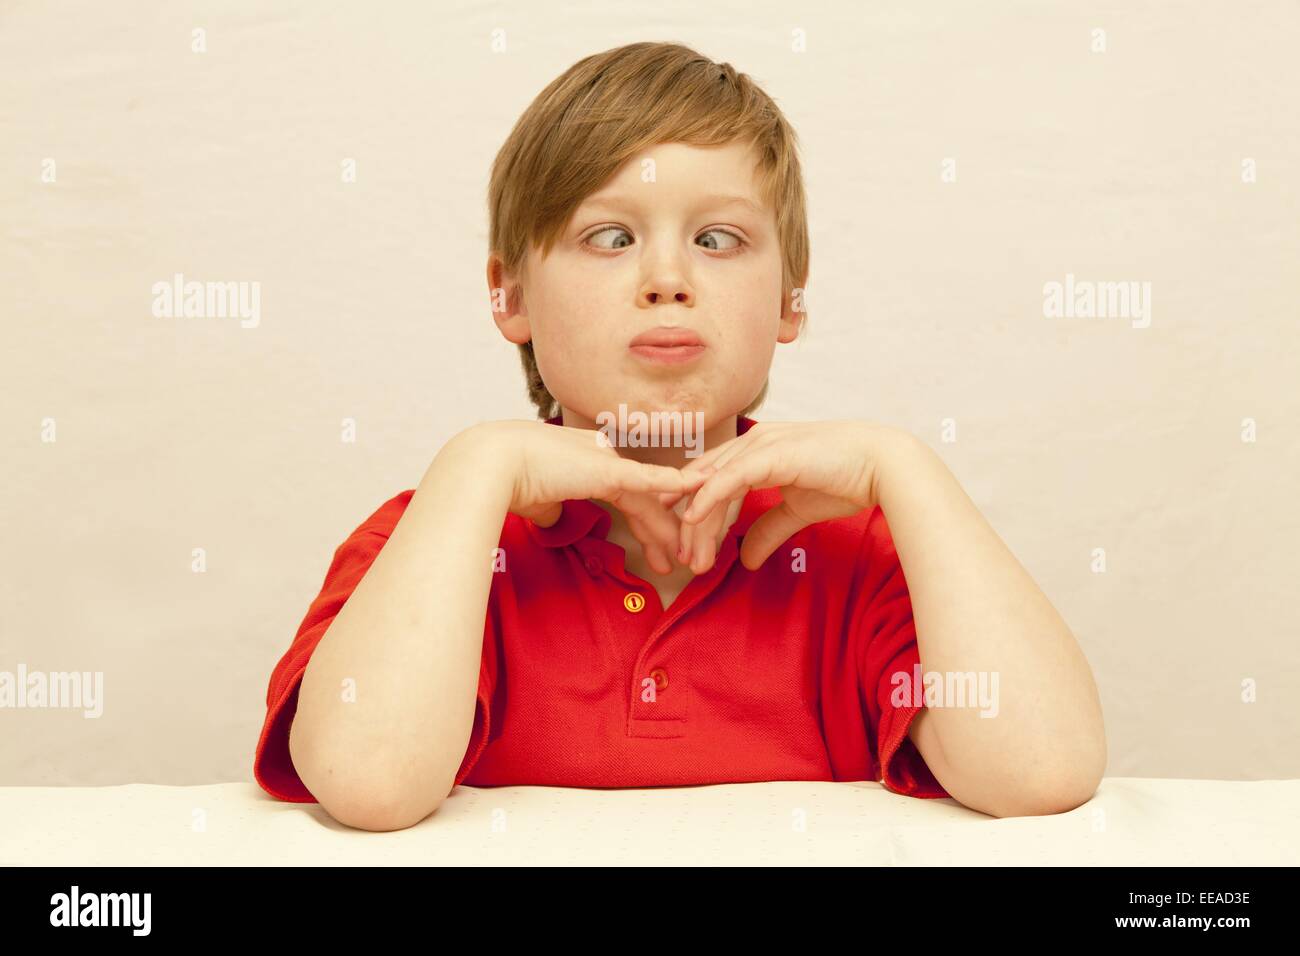 young boy making faces Stock Photo